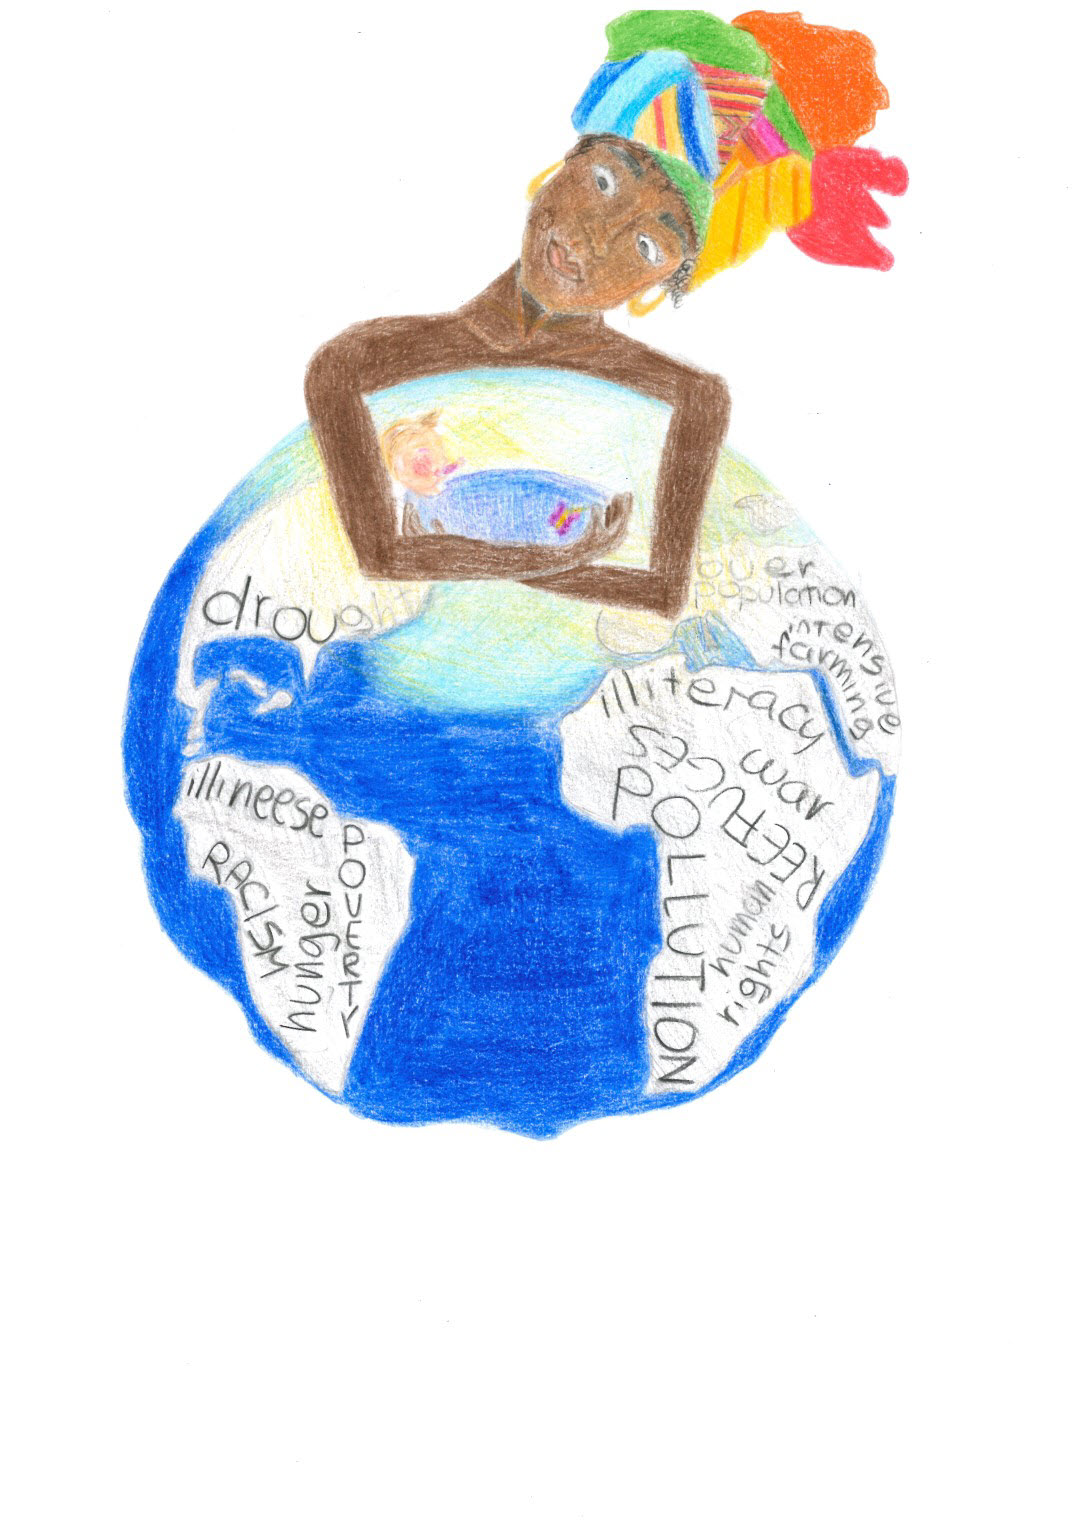 Shows a person hugging the world: drought, illness, racism, pollution and more